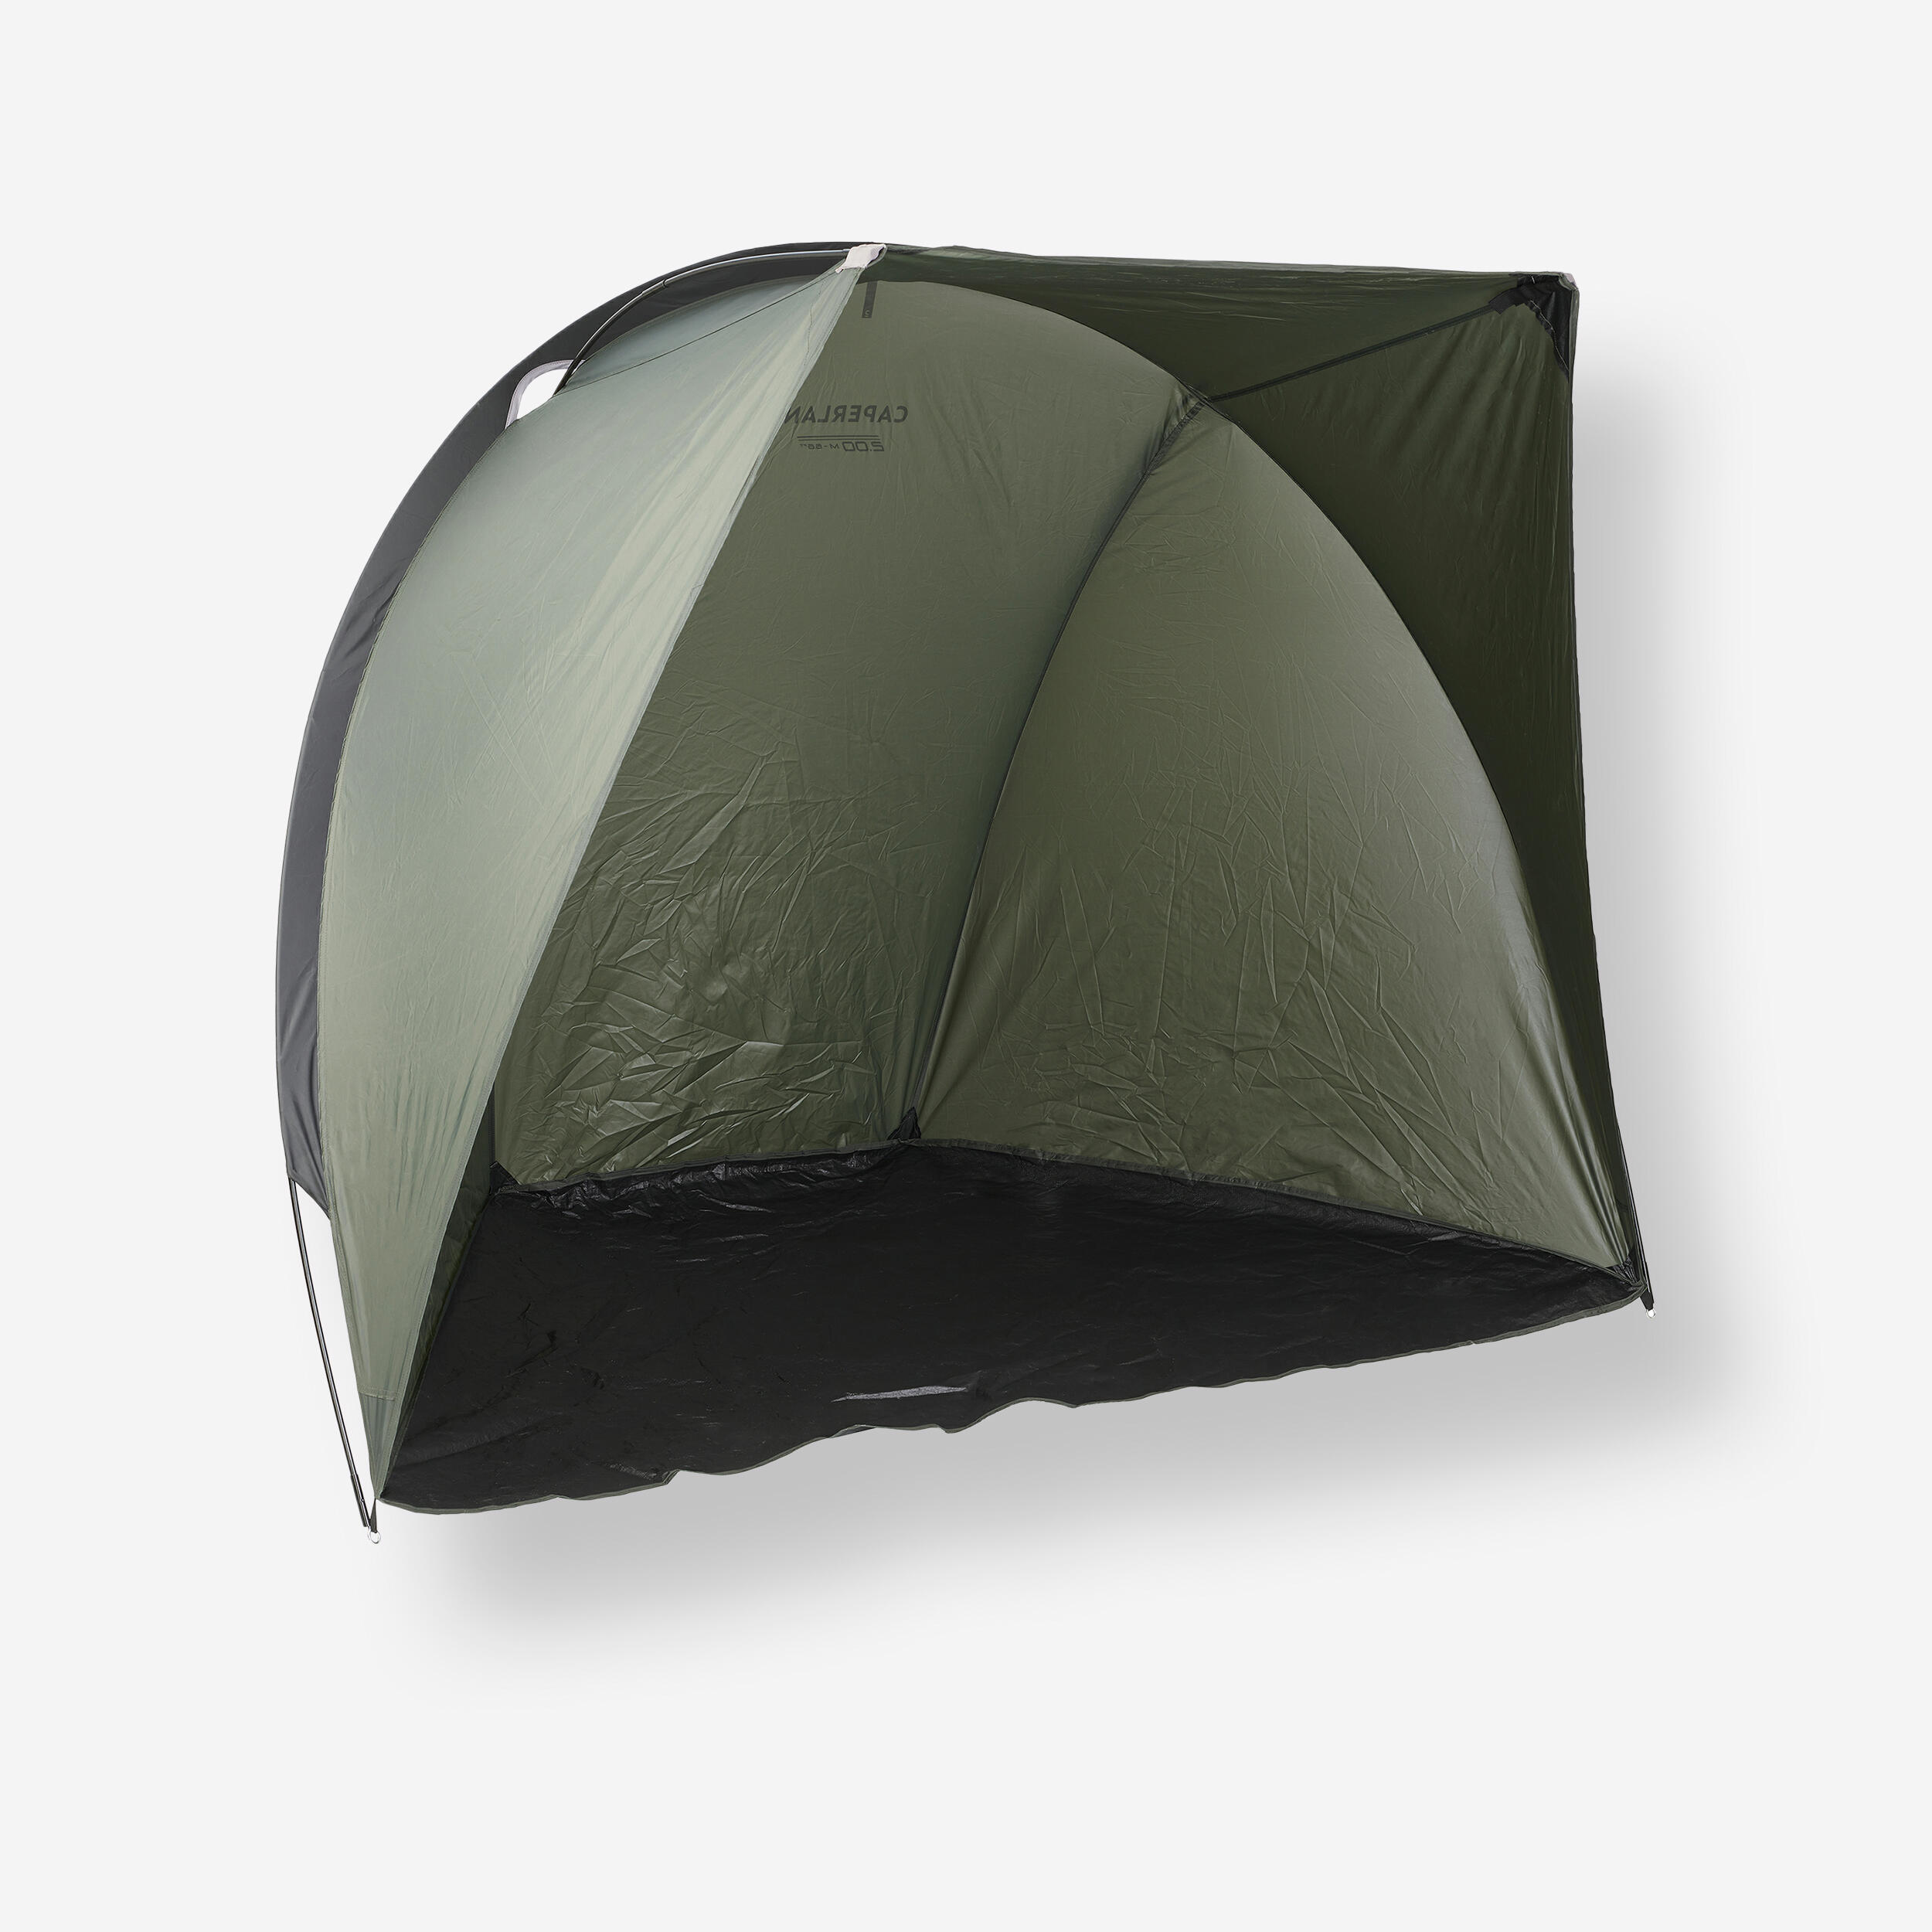 Fishing Bivvy & Shelters, Stay Dry & Comfortable